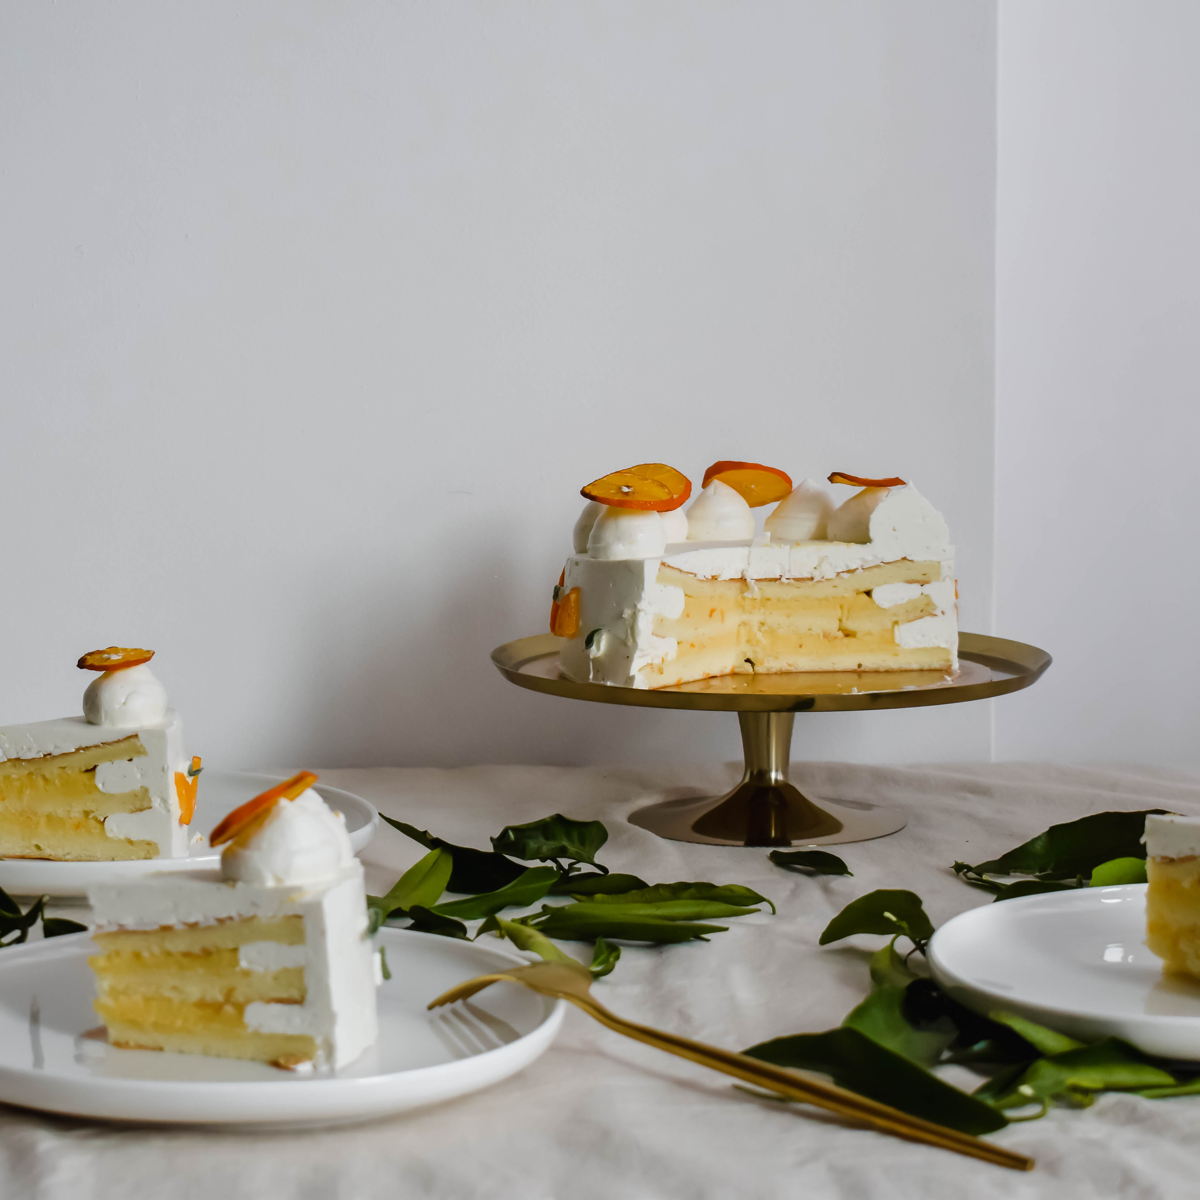 Winter layer cake workshop with a Pastry Chef